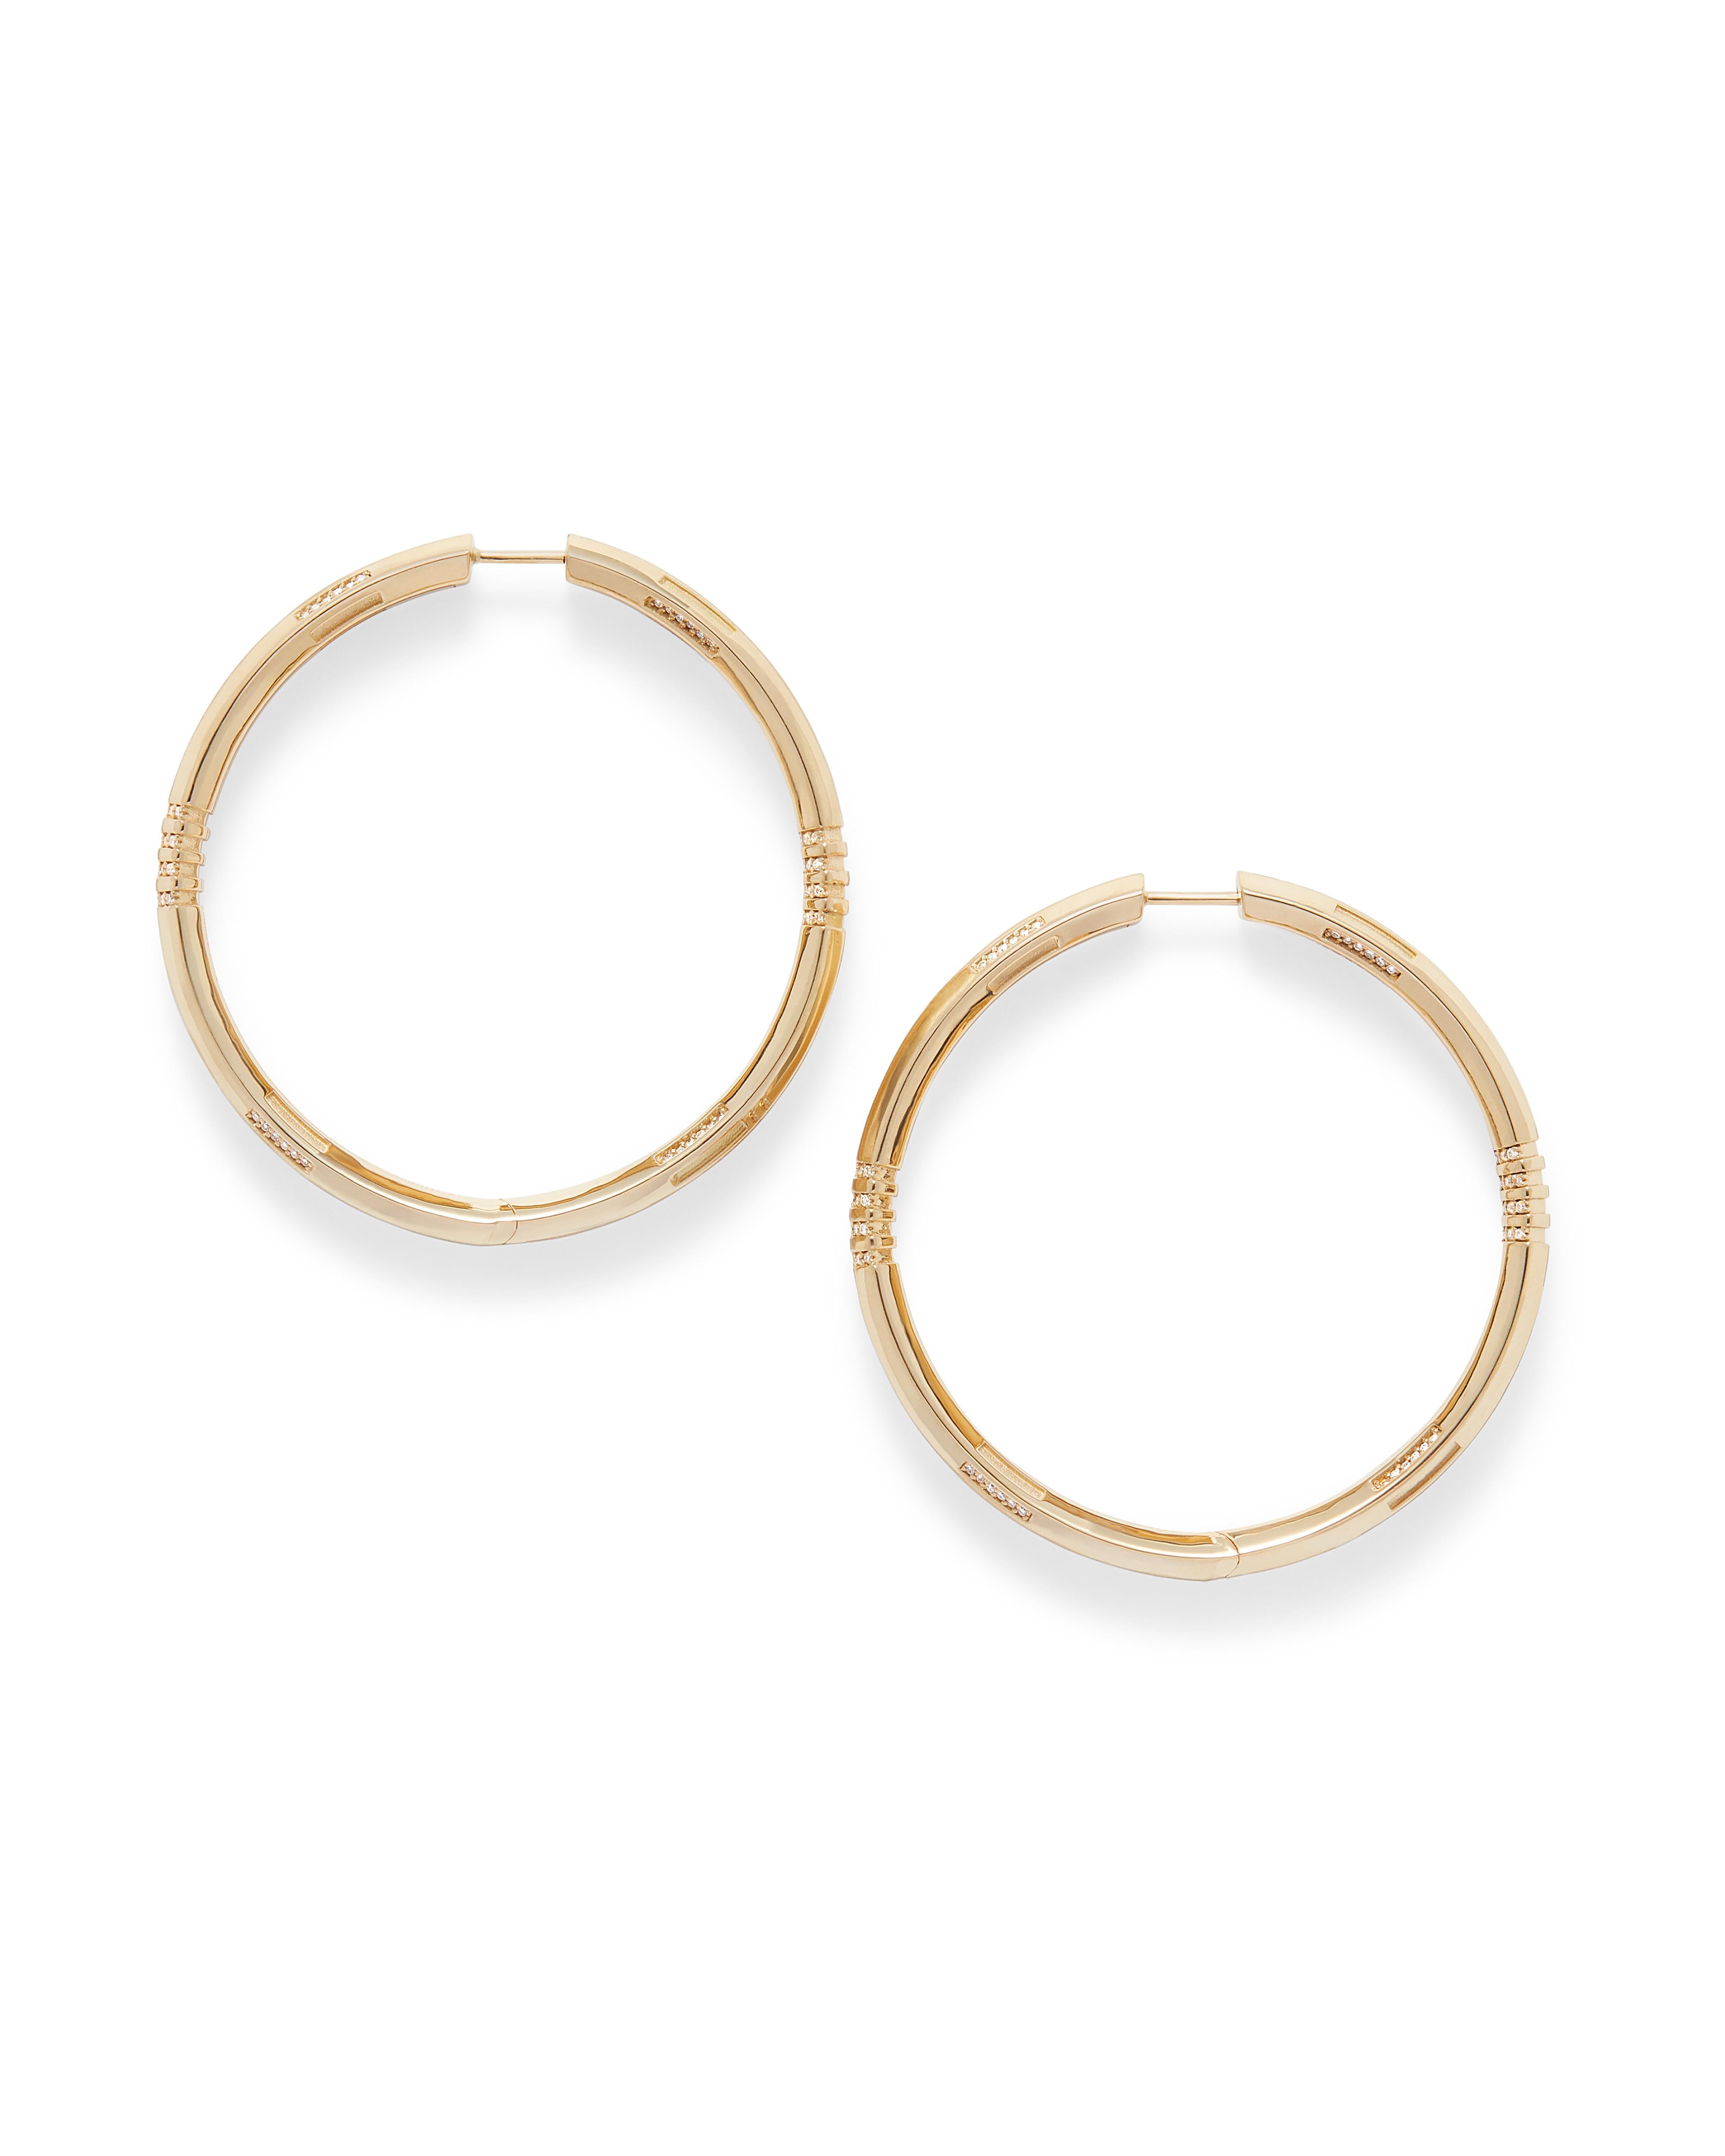 These 18K yellow gold natural diamond inside outside hoop earrings were inspired by the spindle pattern found in traditional Mudcloth textiles from the African diaspora.

Matte and high polished finishes bring dearth and dimension to these unique